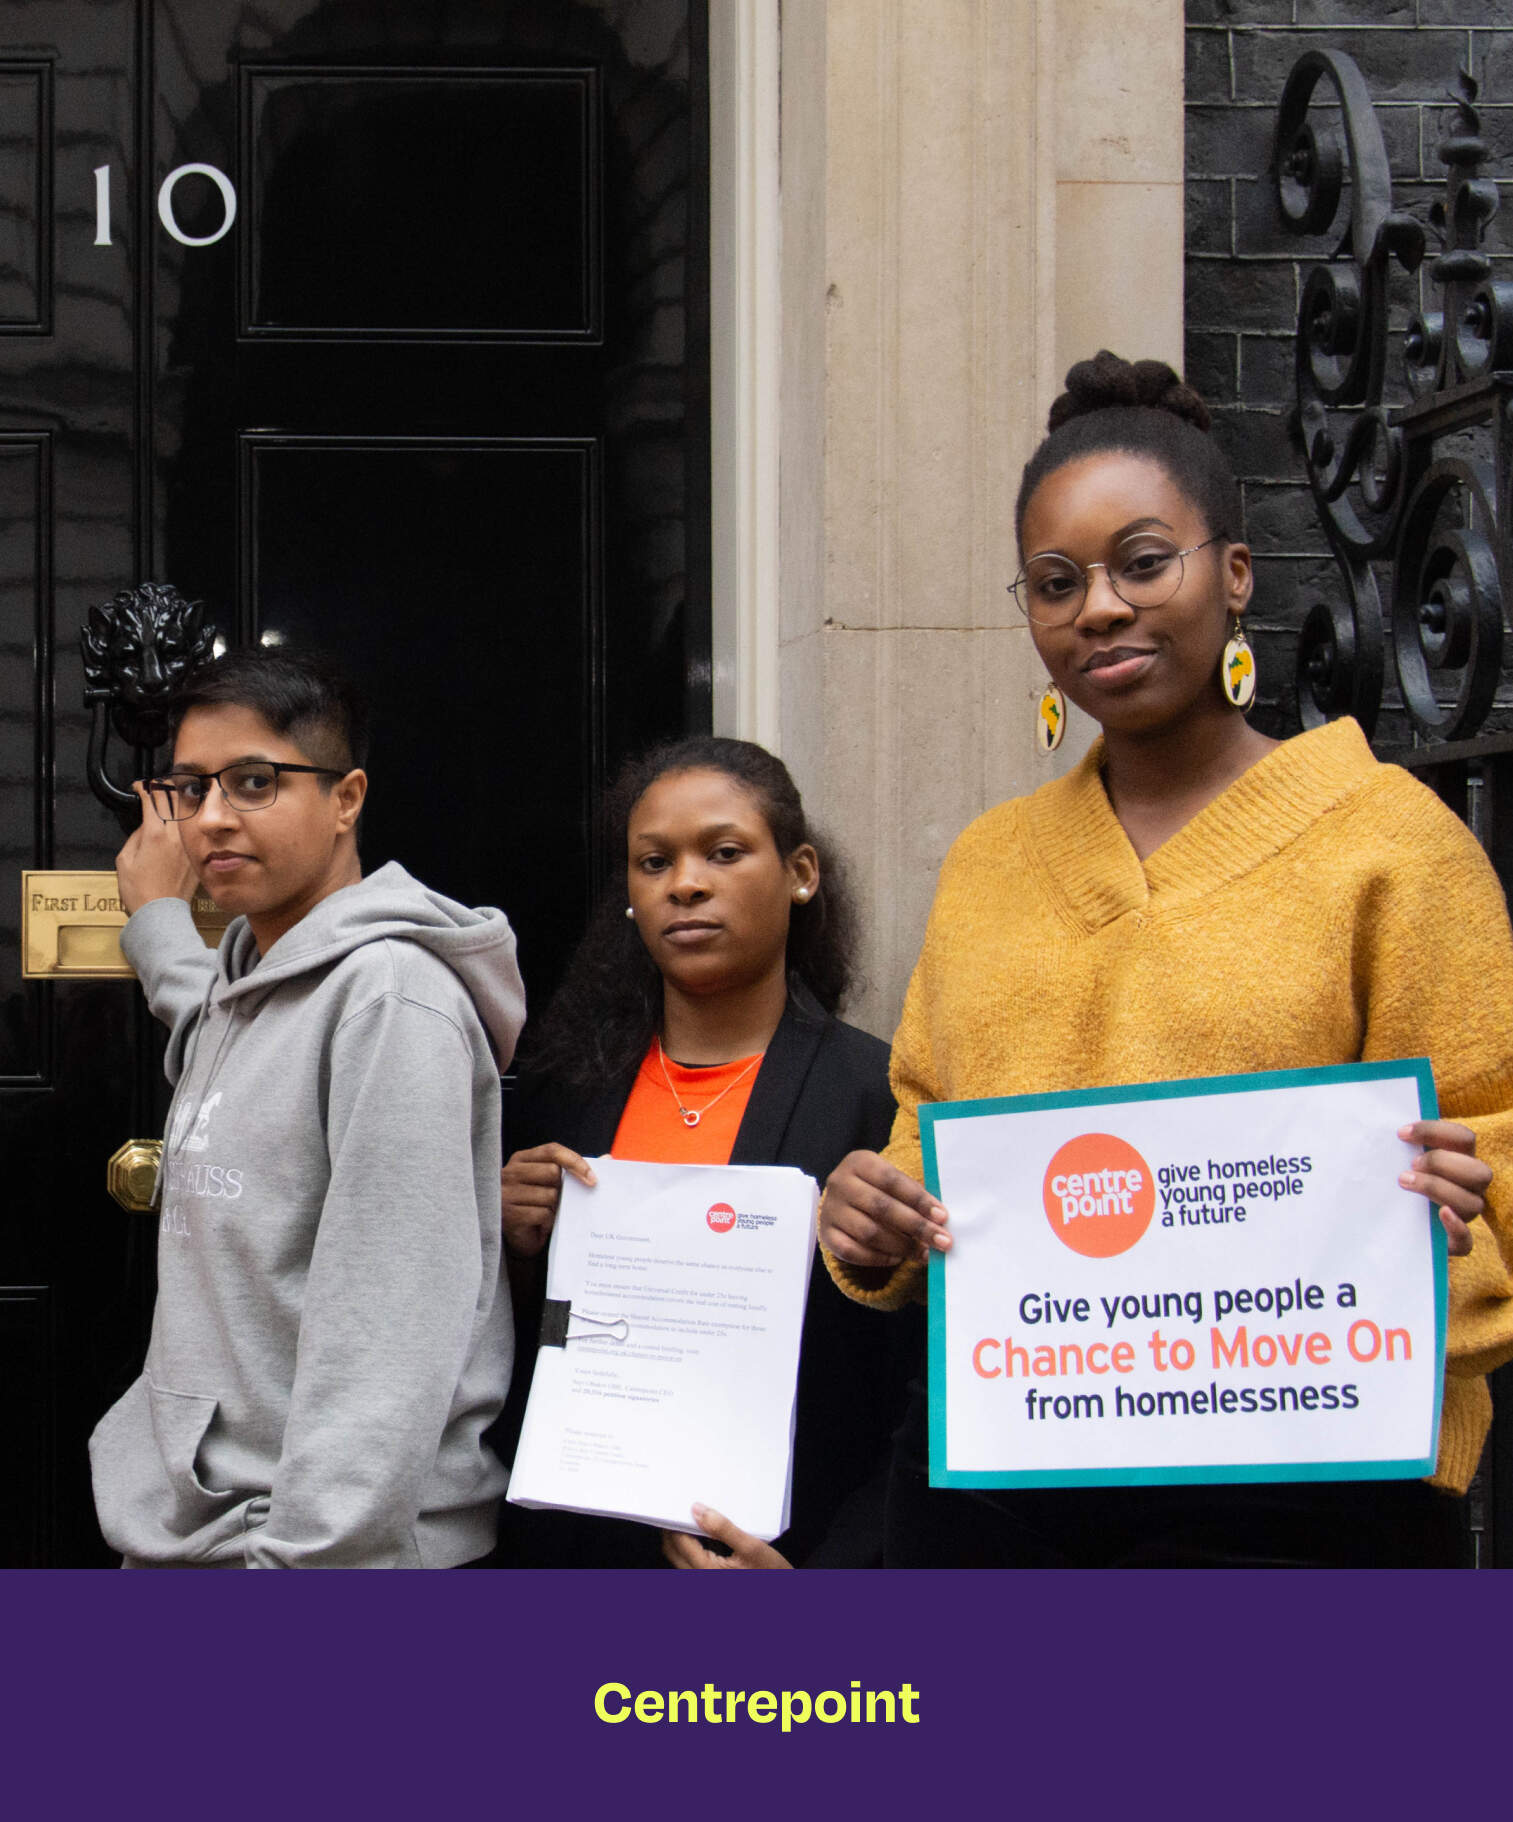 Centrepoint. Two young girls holding papers and a sign. The sign says "Give young people a Change to Move On from homelessness.